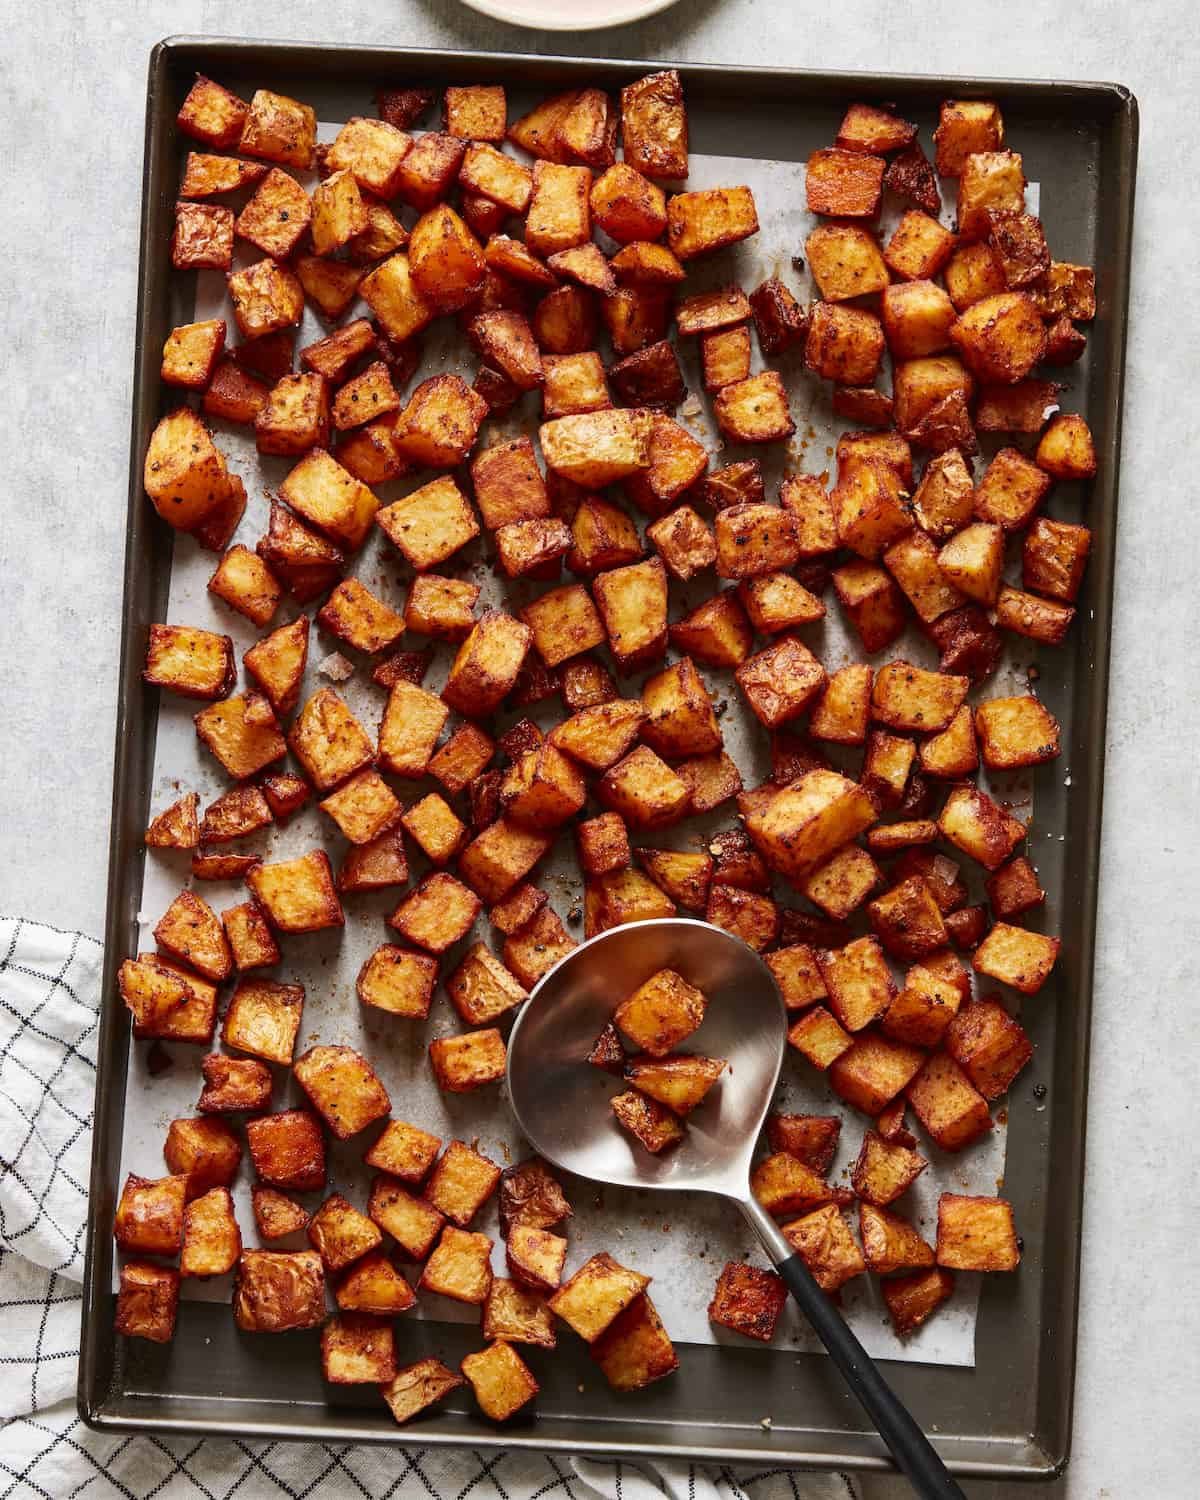 A parchment paper-lined baking sheet with cubed roasted potatoes and a serving spoon placed on a white kitchen towel.